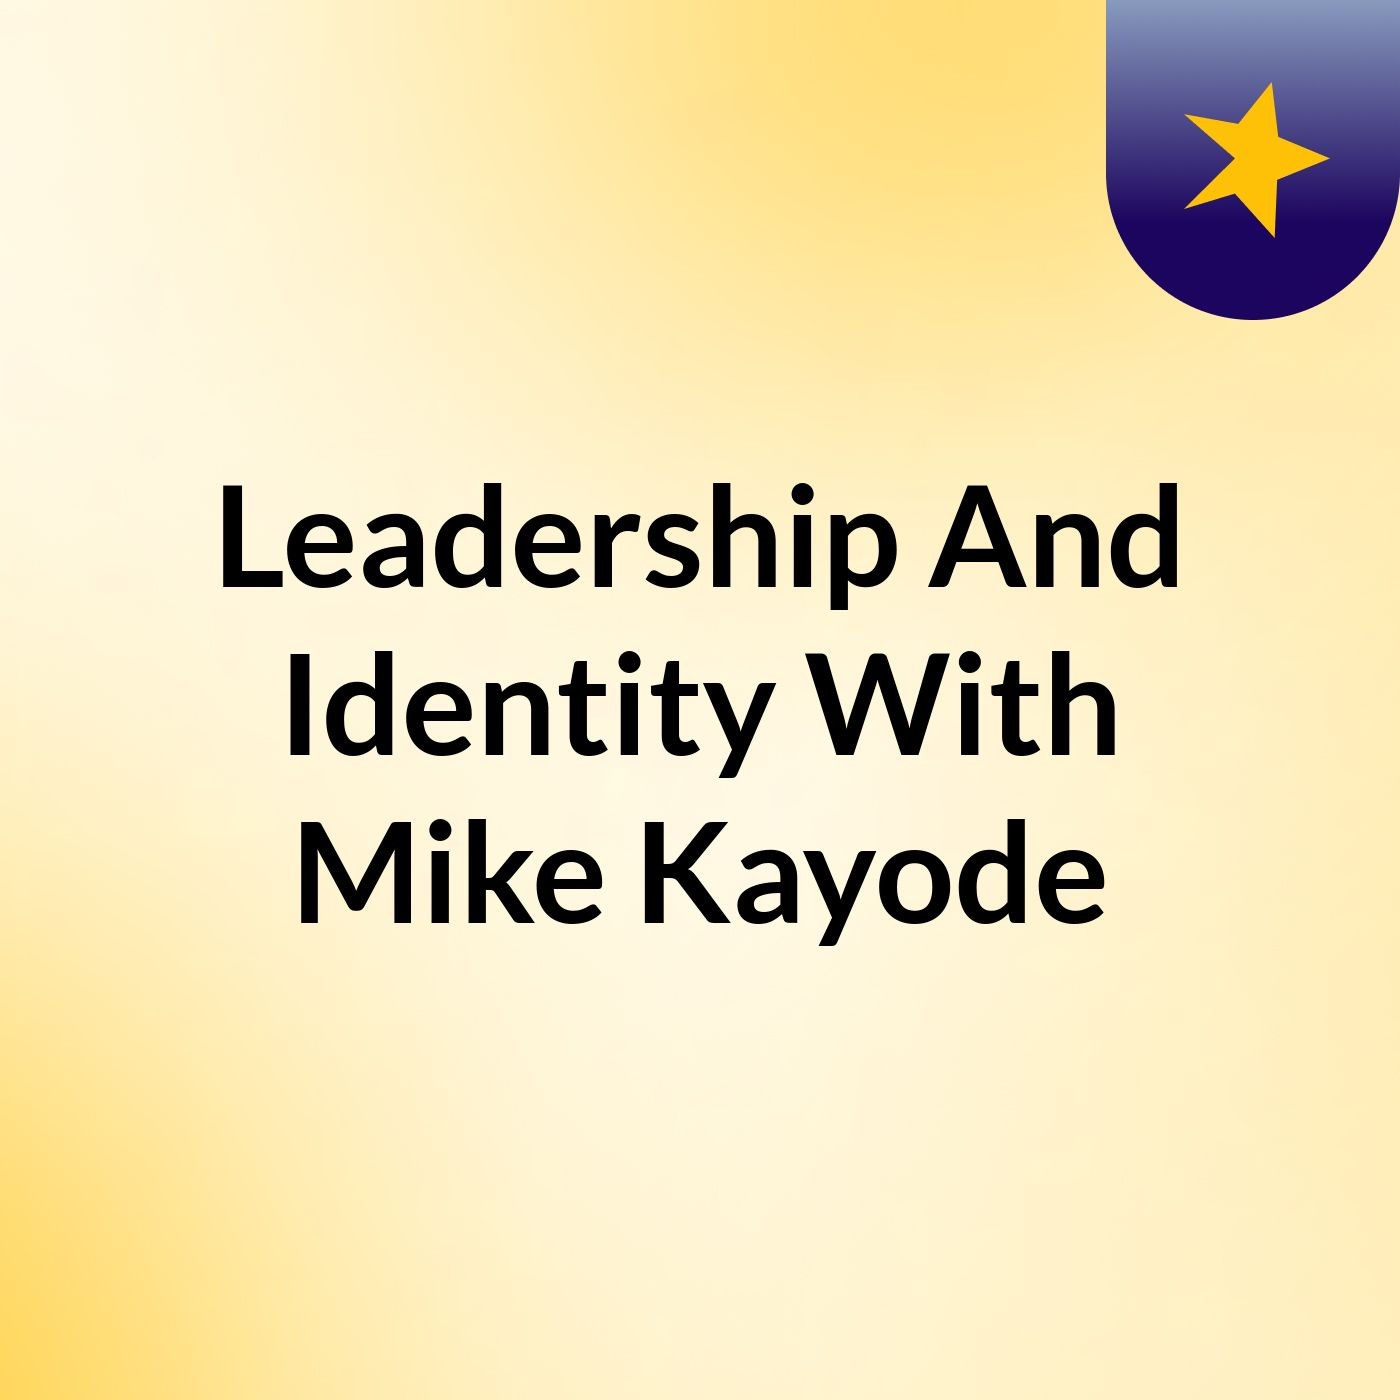 Leadership And Identity With Mike Kayode